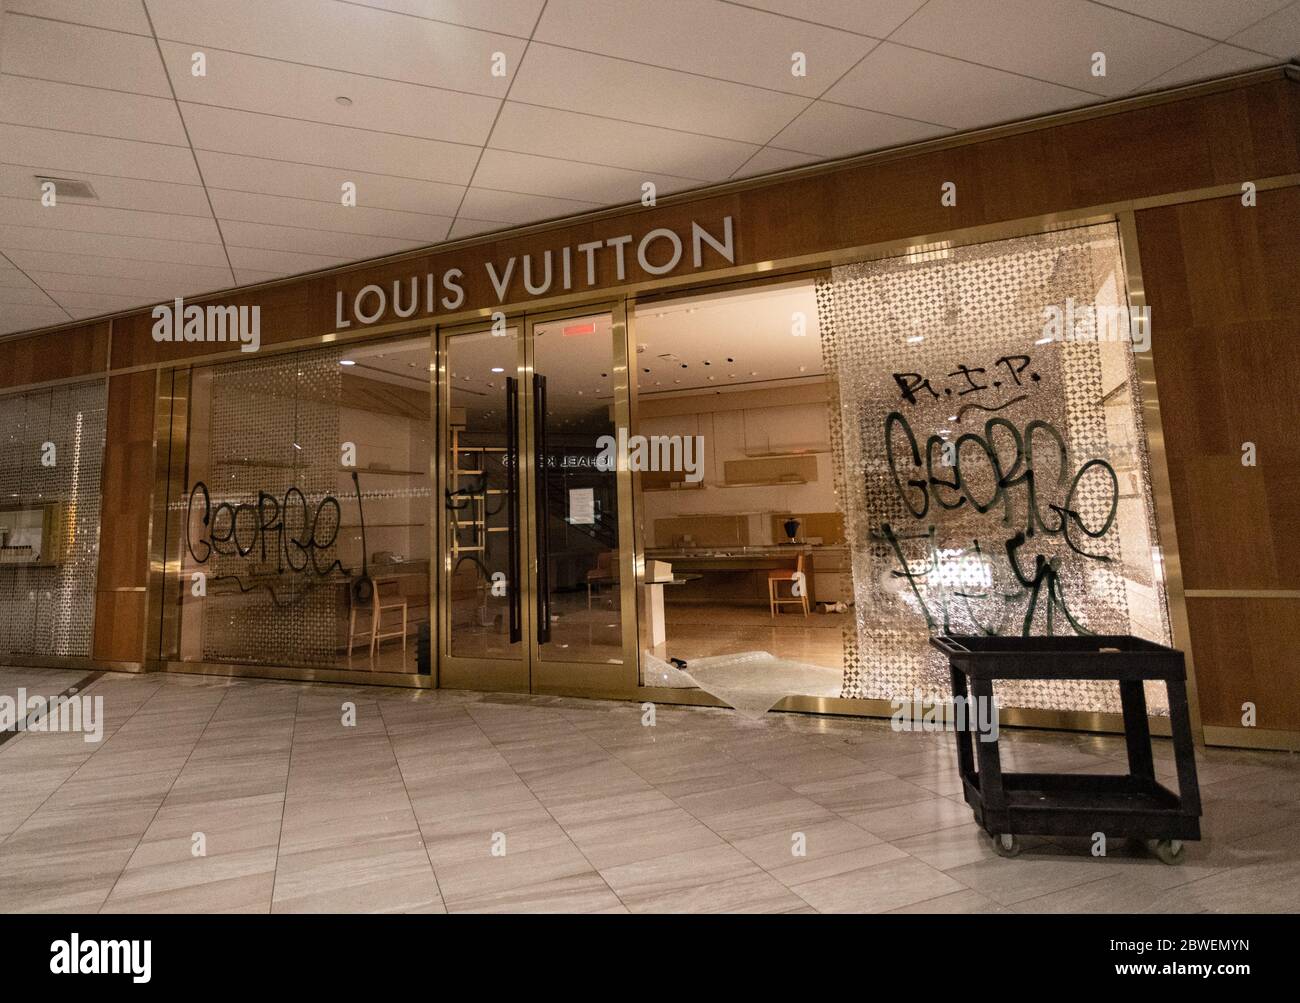 Louis Vuitton at Copley Place - A Shopping Center in Boston, MA